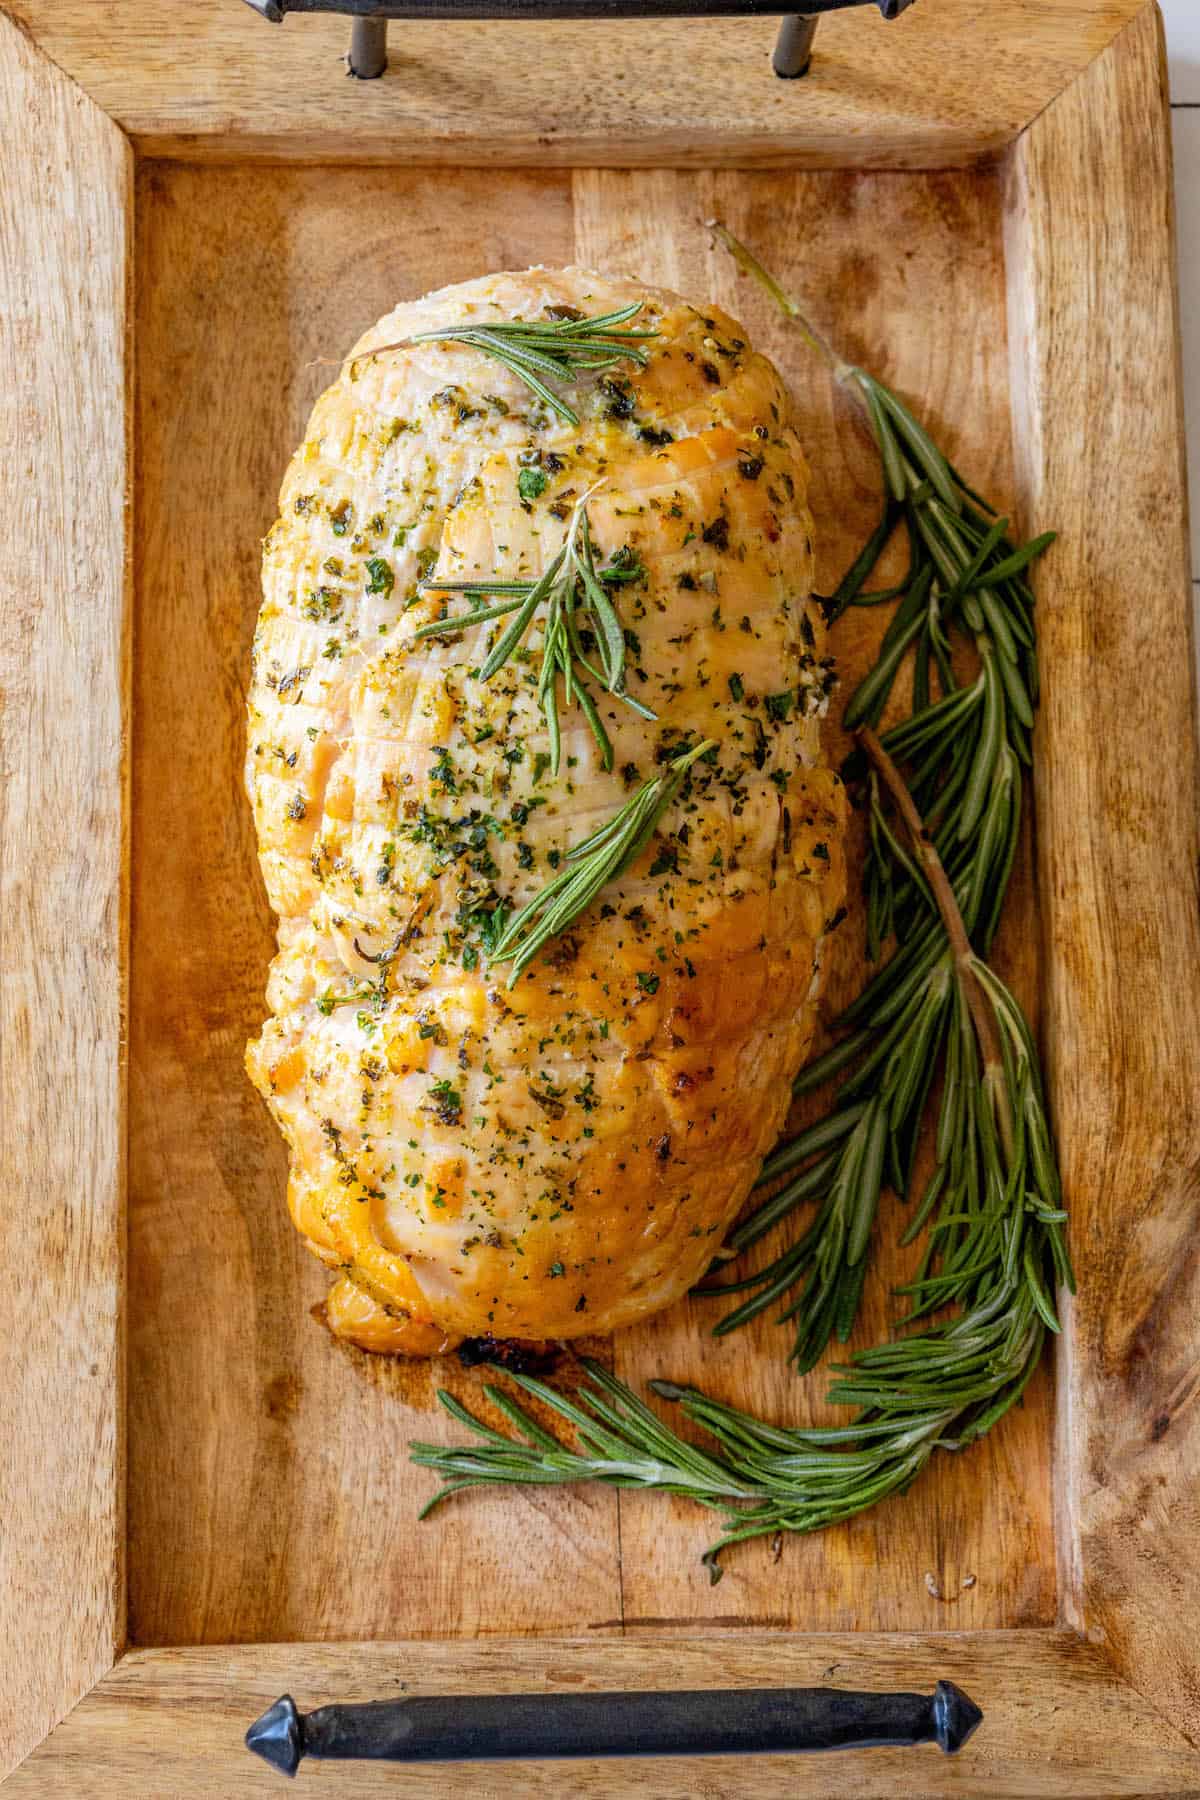 An Oven Baked Turkey Breast with rosemary on a wooden tray.